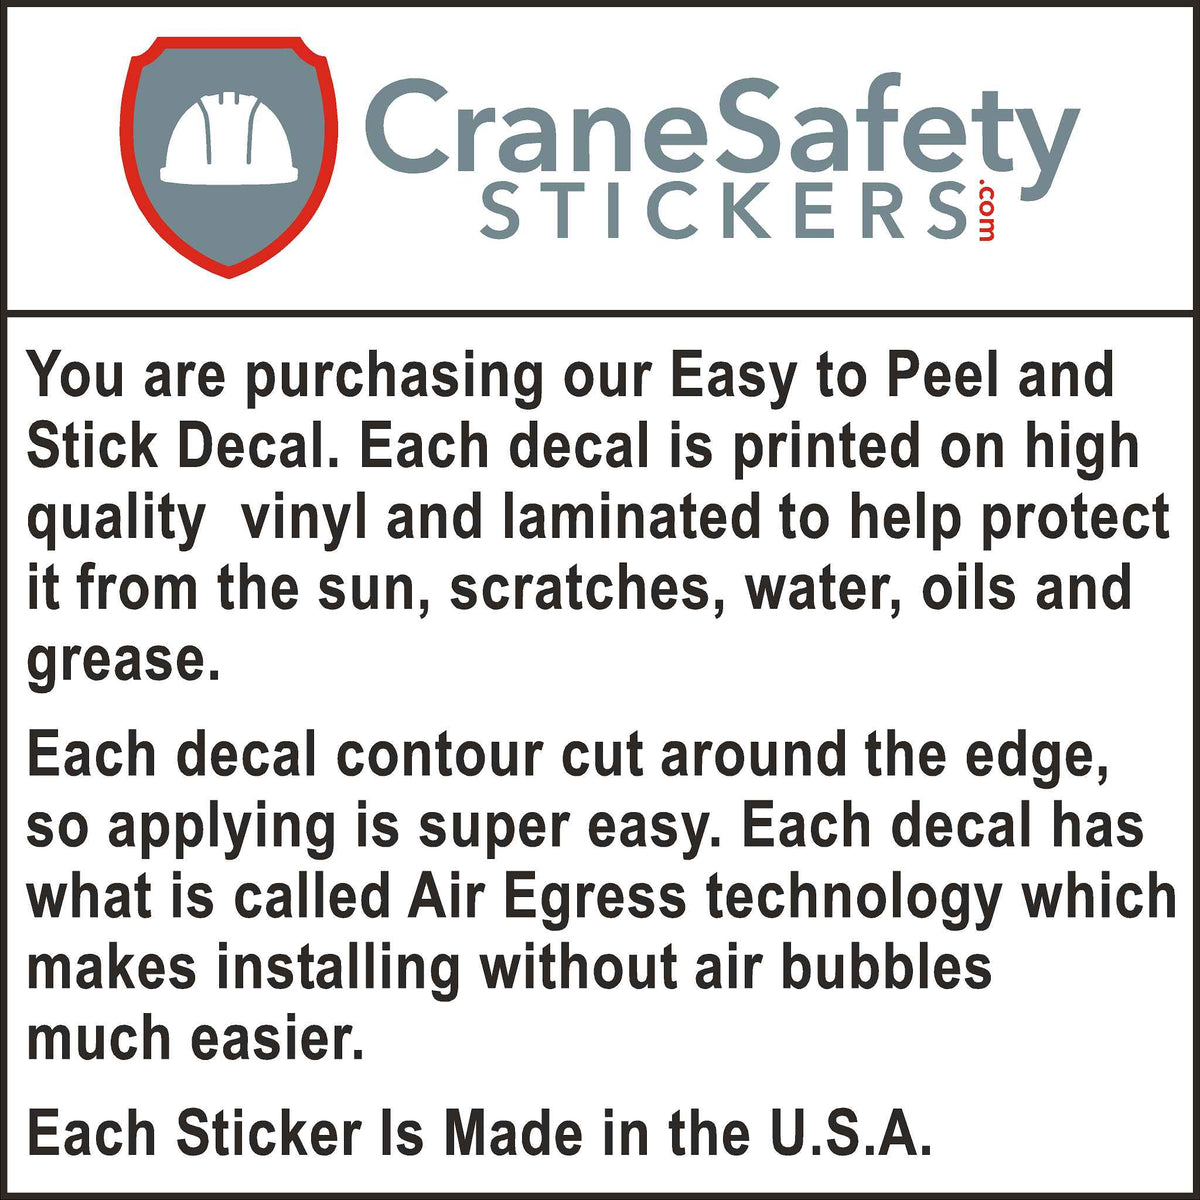 Quality of our safety is a job requirement sticker.